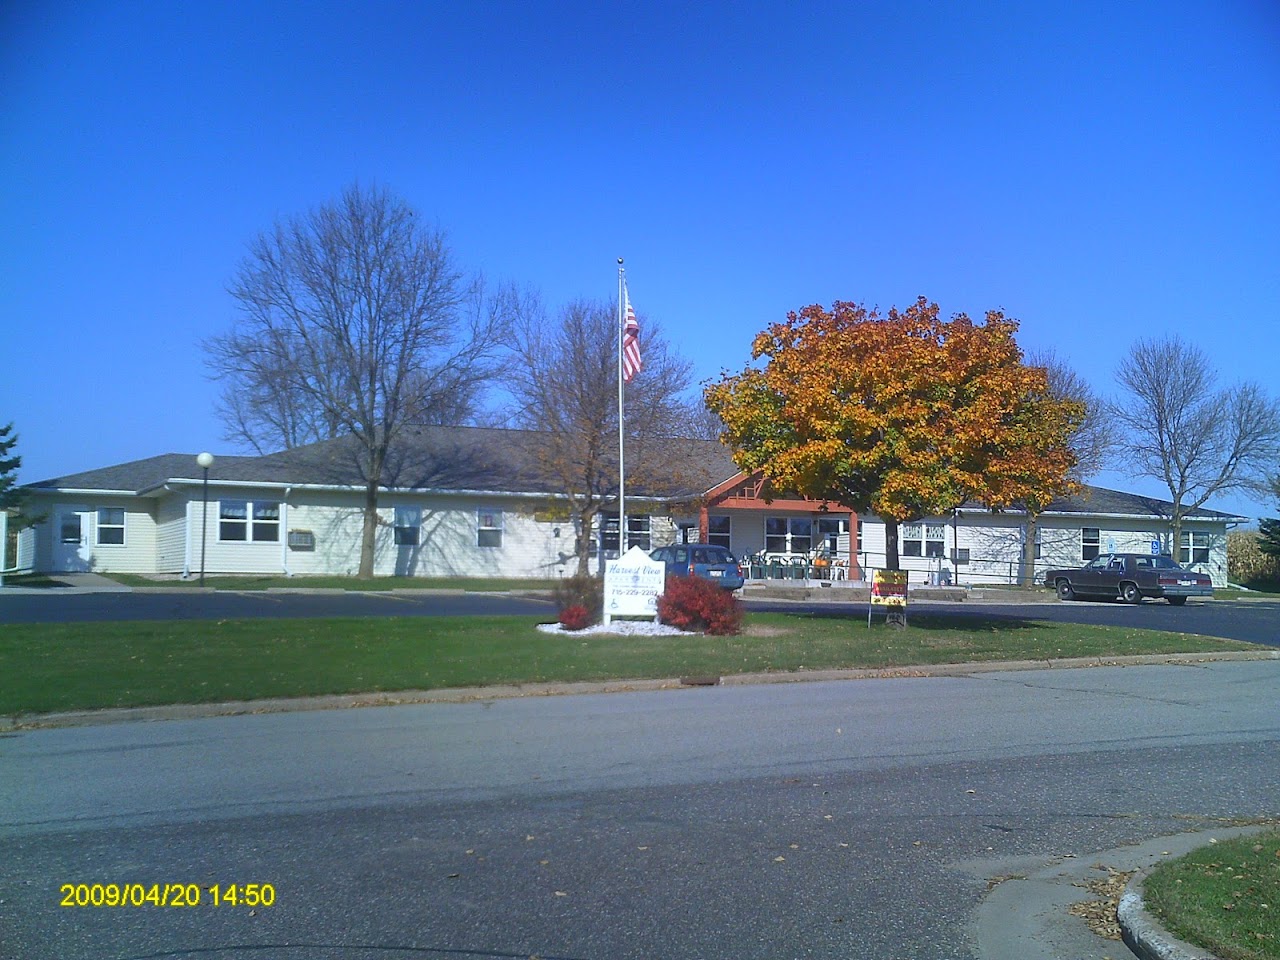 Photo of HARVEST VIEW APTS at 424 E BEGLEY ST GREENWOOD, WI 54437